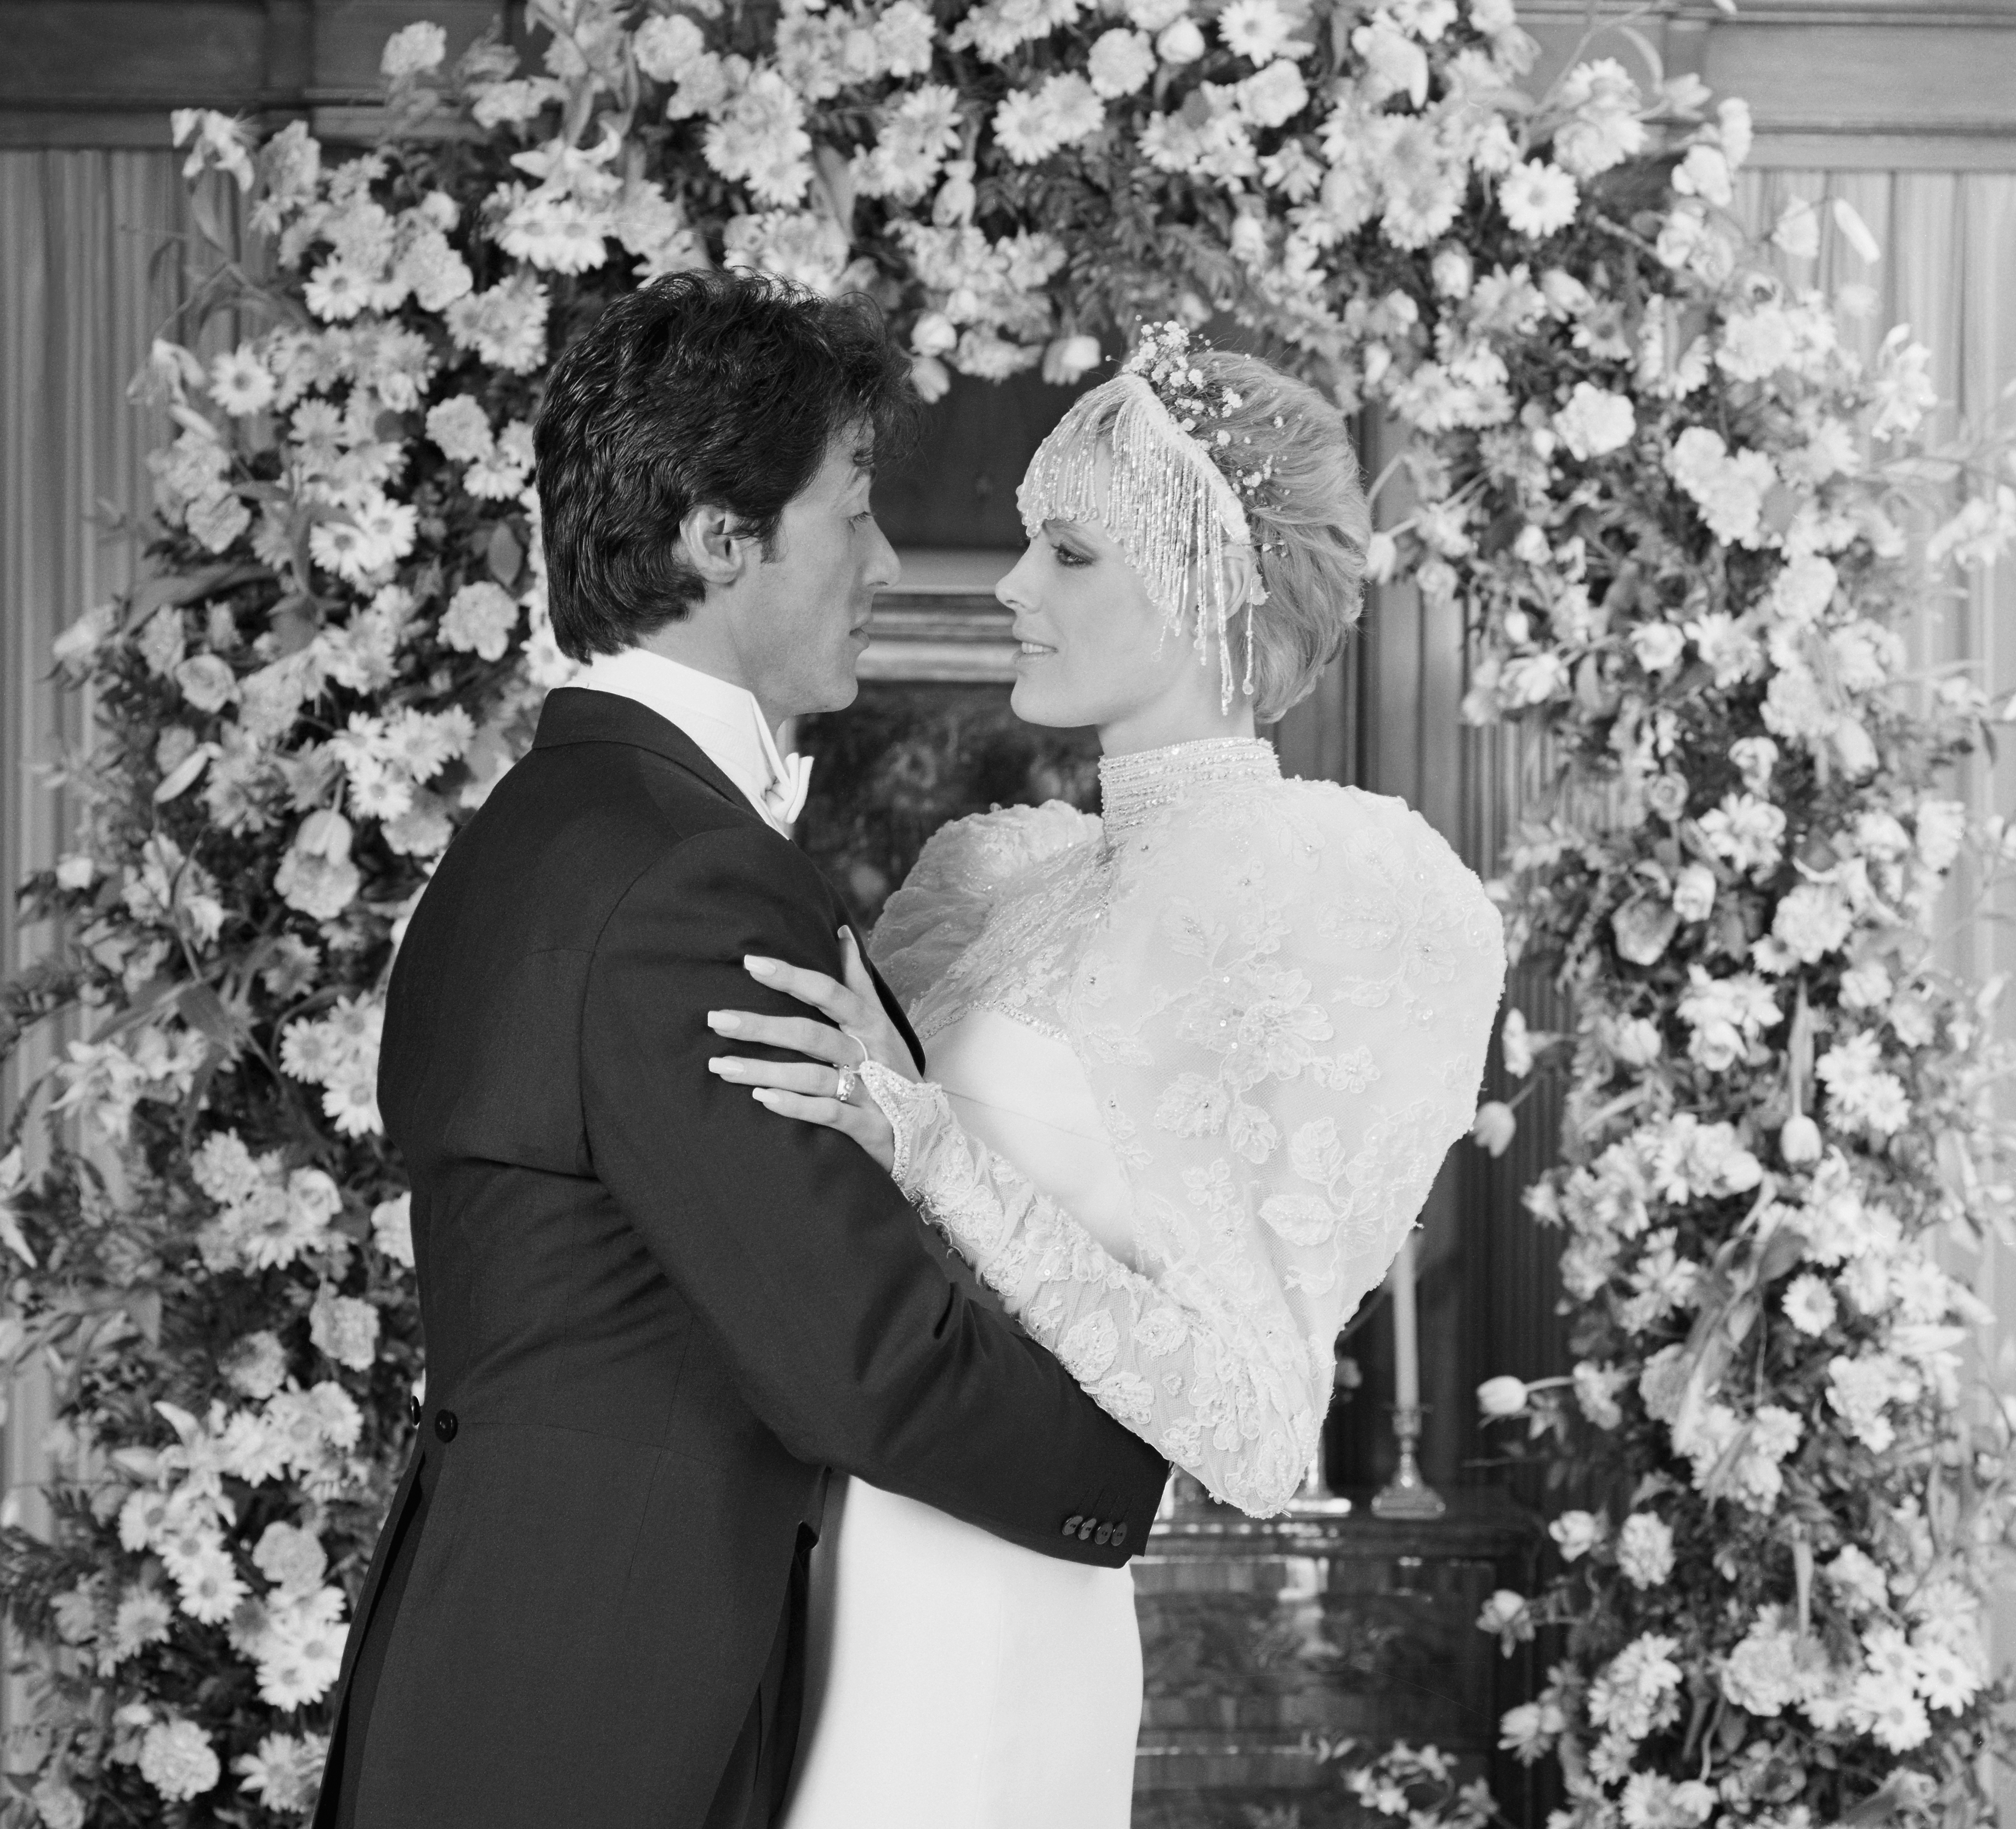 Sylvester Stallone and Brigitte Nielsen sharing an embrace at their wedding at the home of Irwin Winkler, 1985 | Source: Getty Images